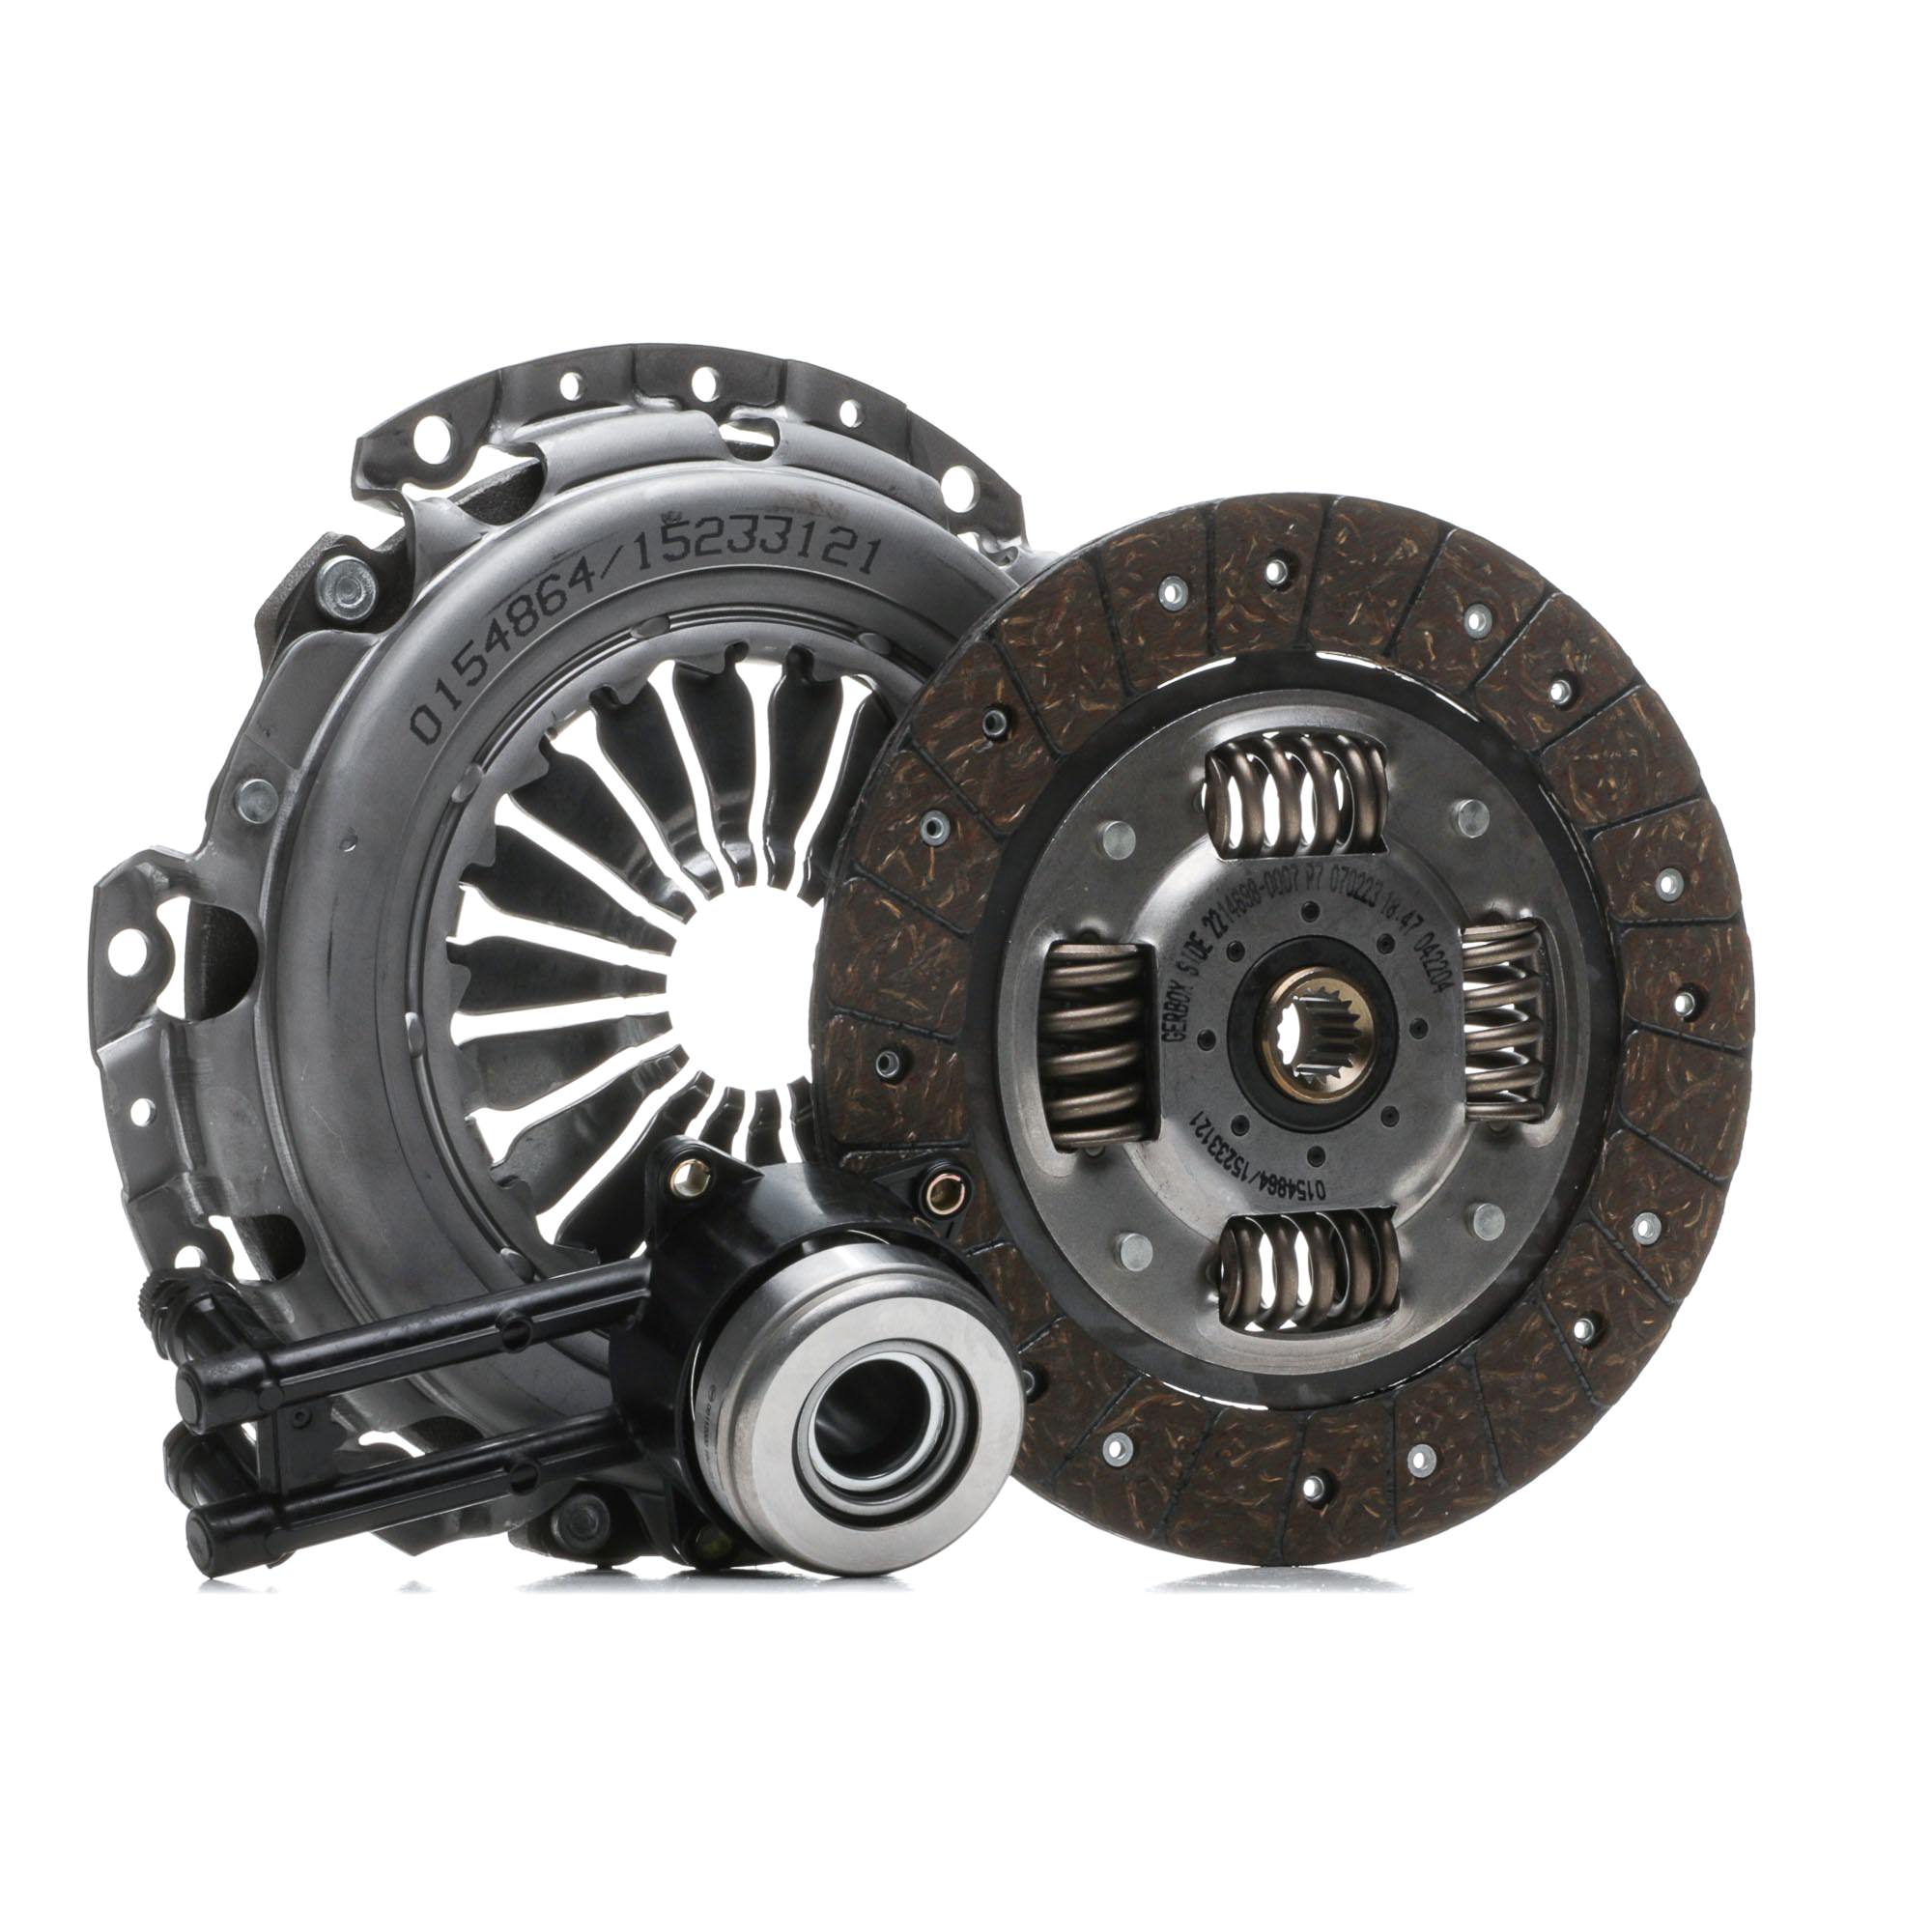 Clutch replacement kit STARK with clutch pressure plate, with central slave cylinder, with clutch disc, 220mm - SKCK-0100596